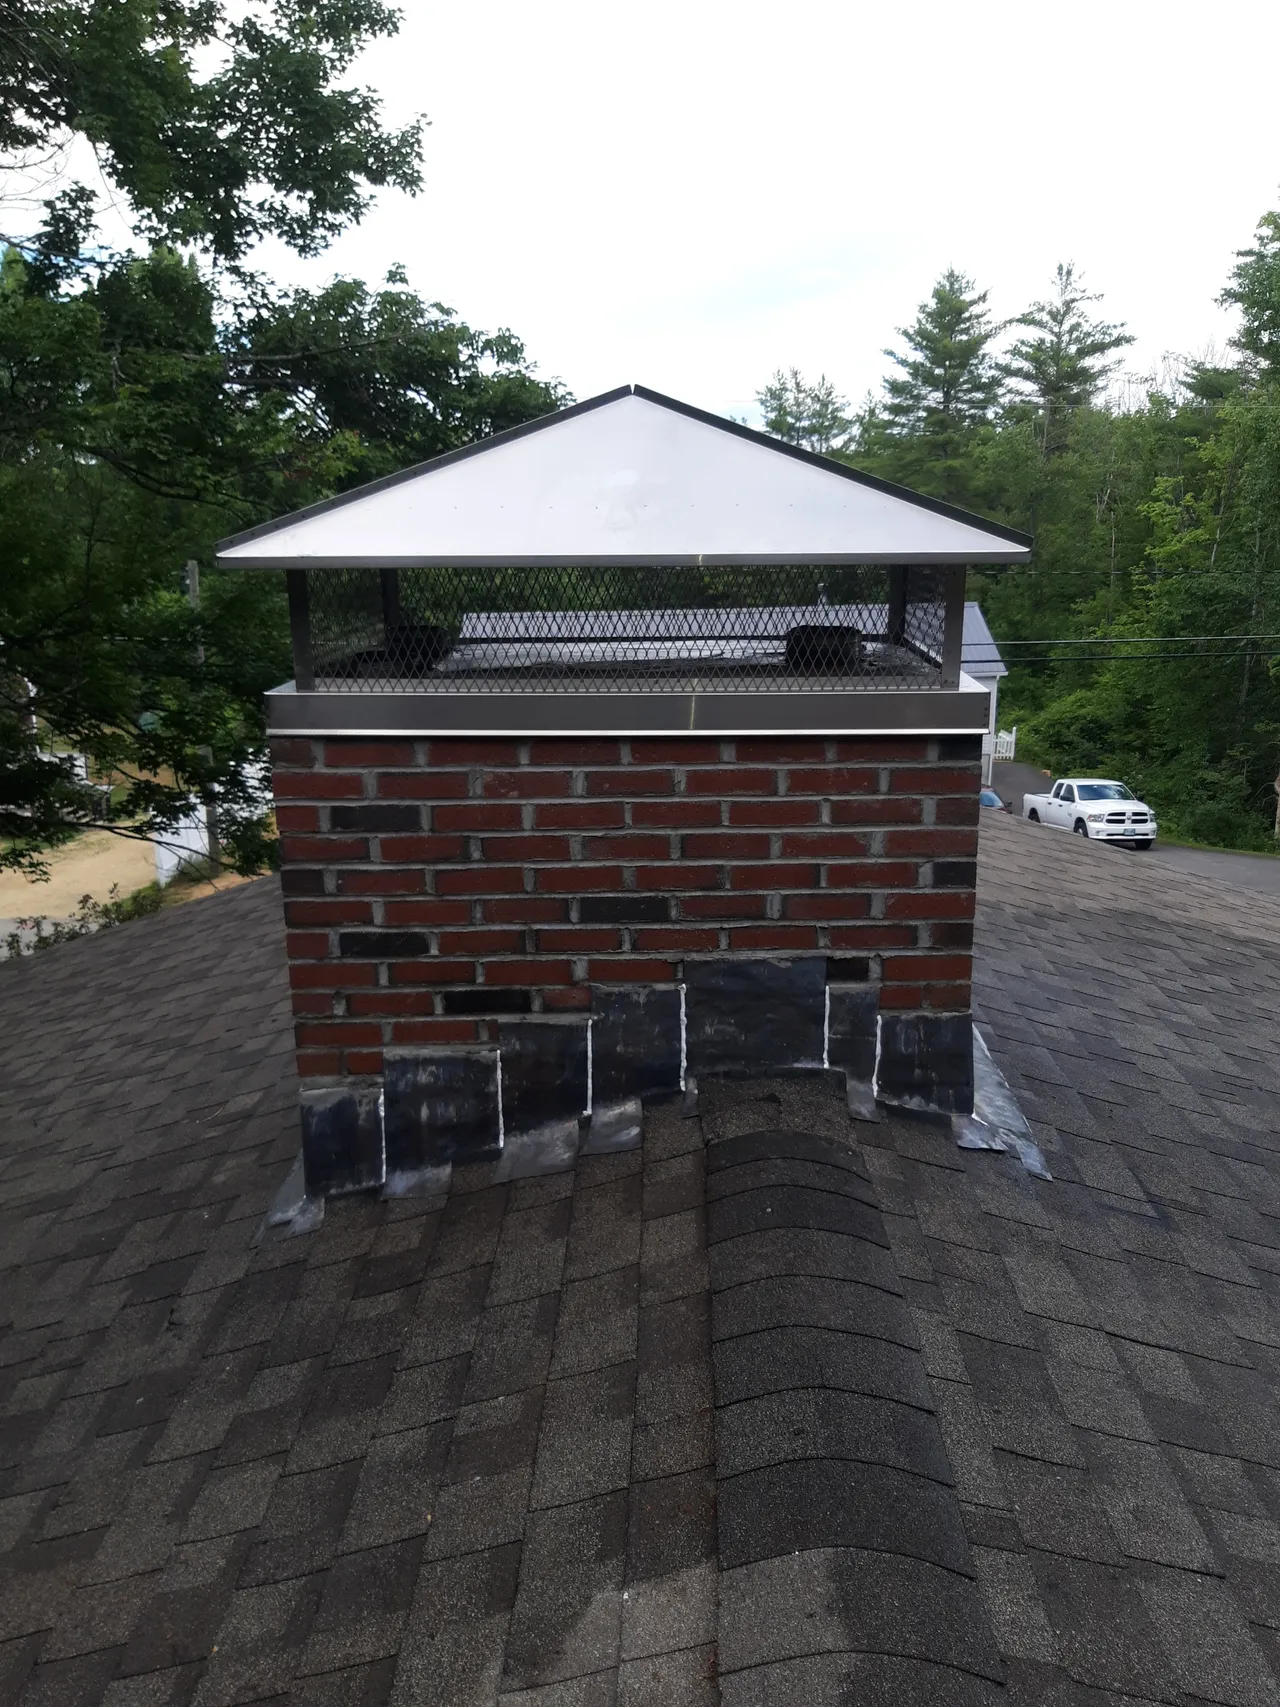 The chimney flashing is the metalic (lead) material in between the brick and the roofing shingles.